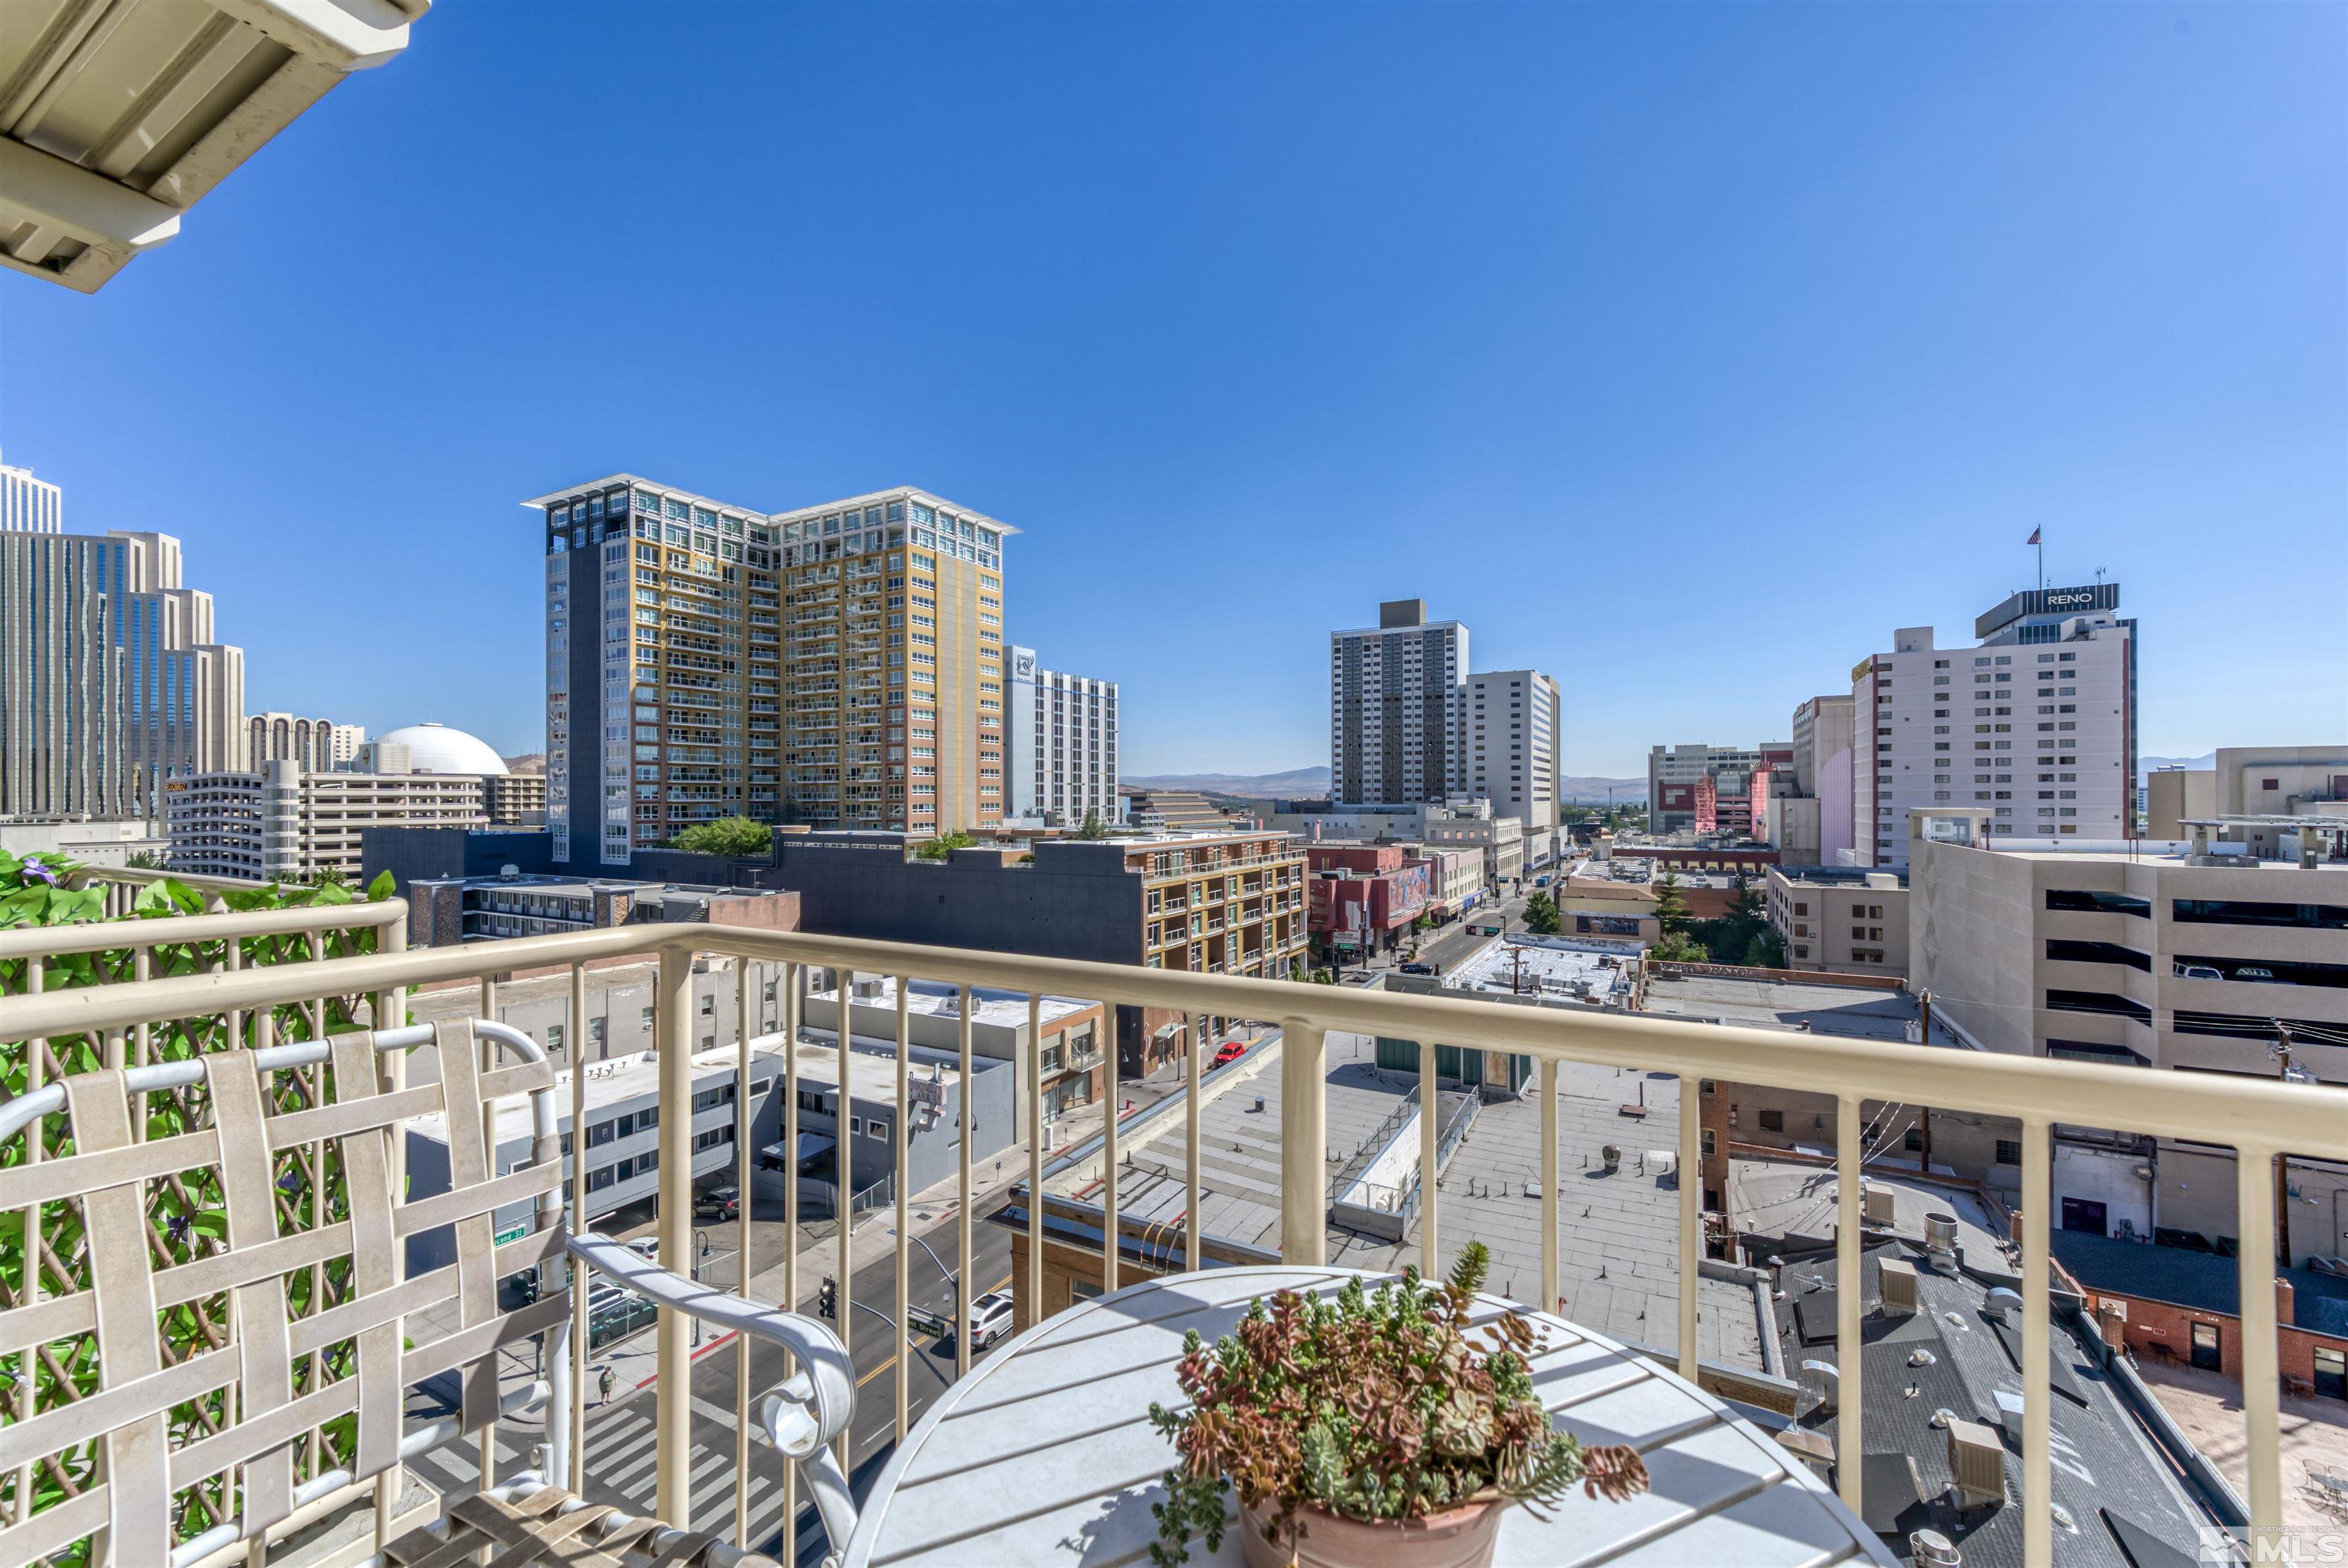 More Details about MLS # 220012697 : 200 W 2ND ST APT 705